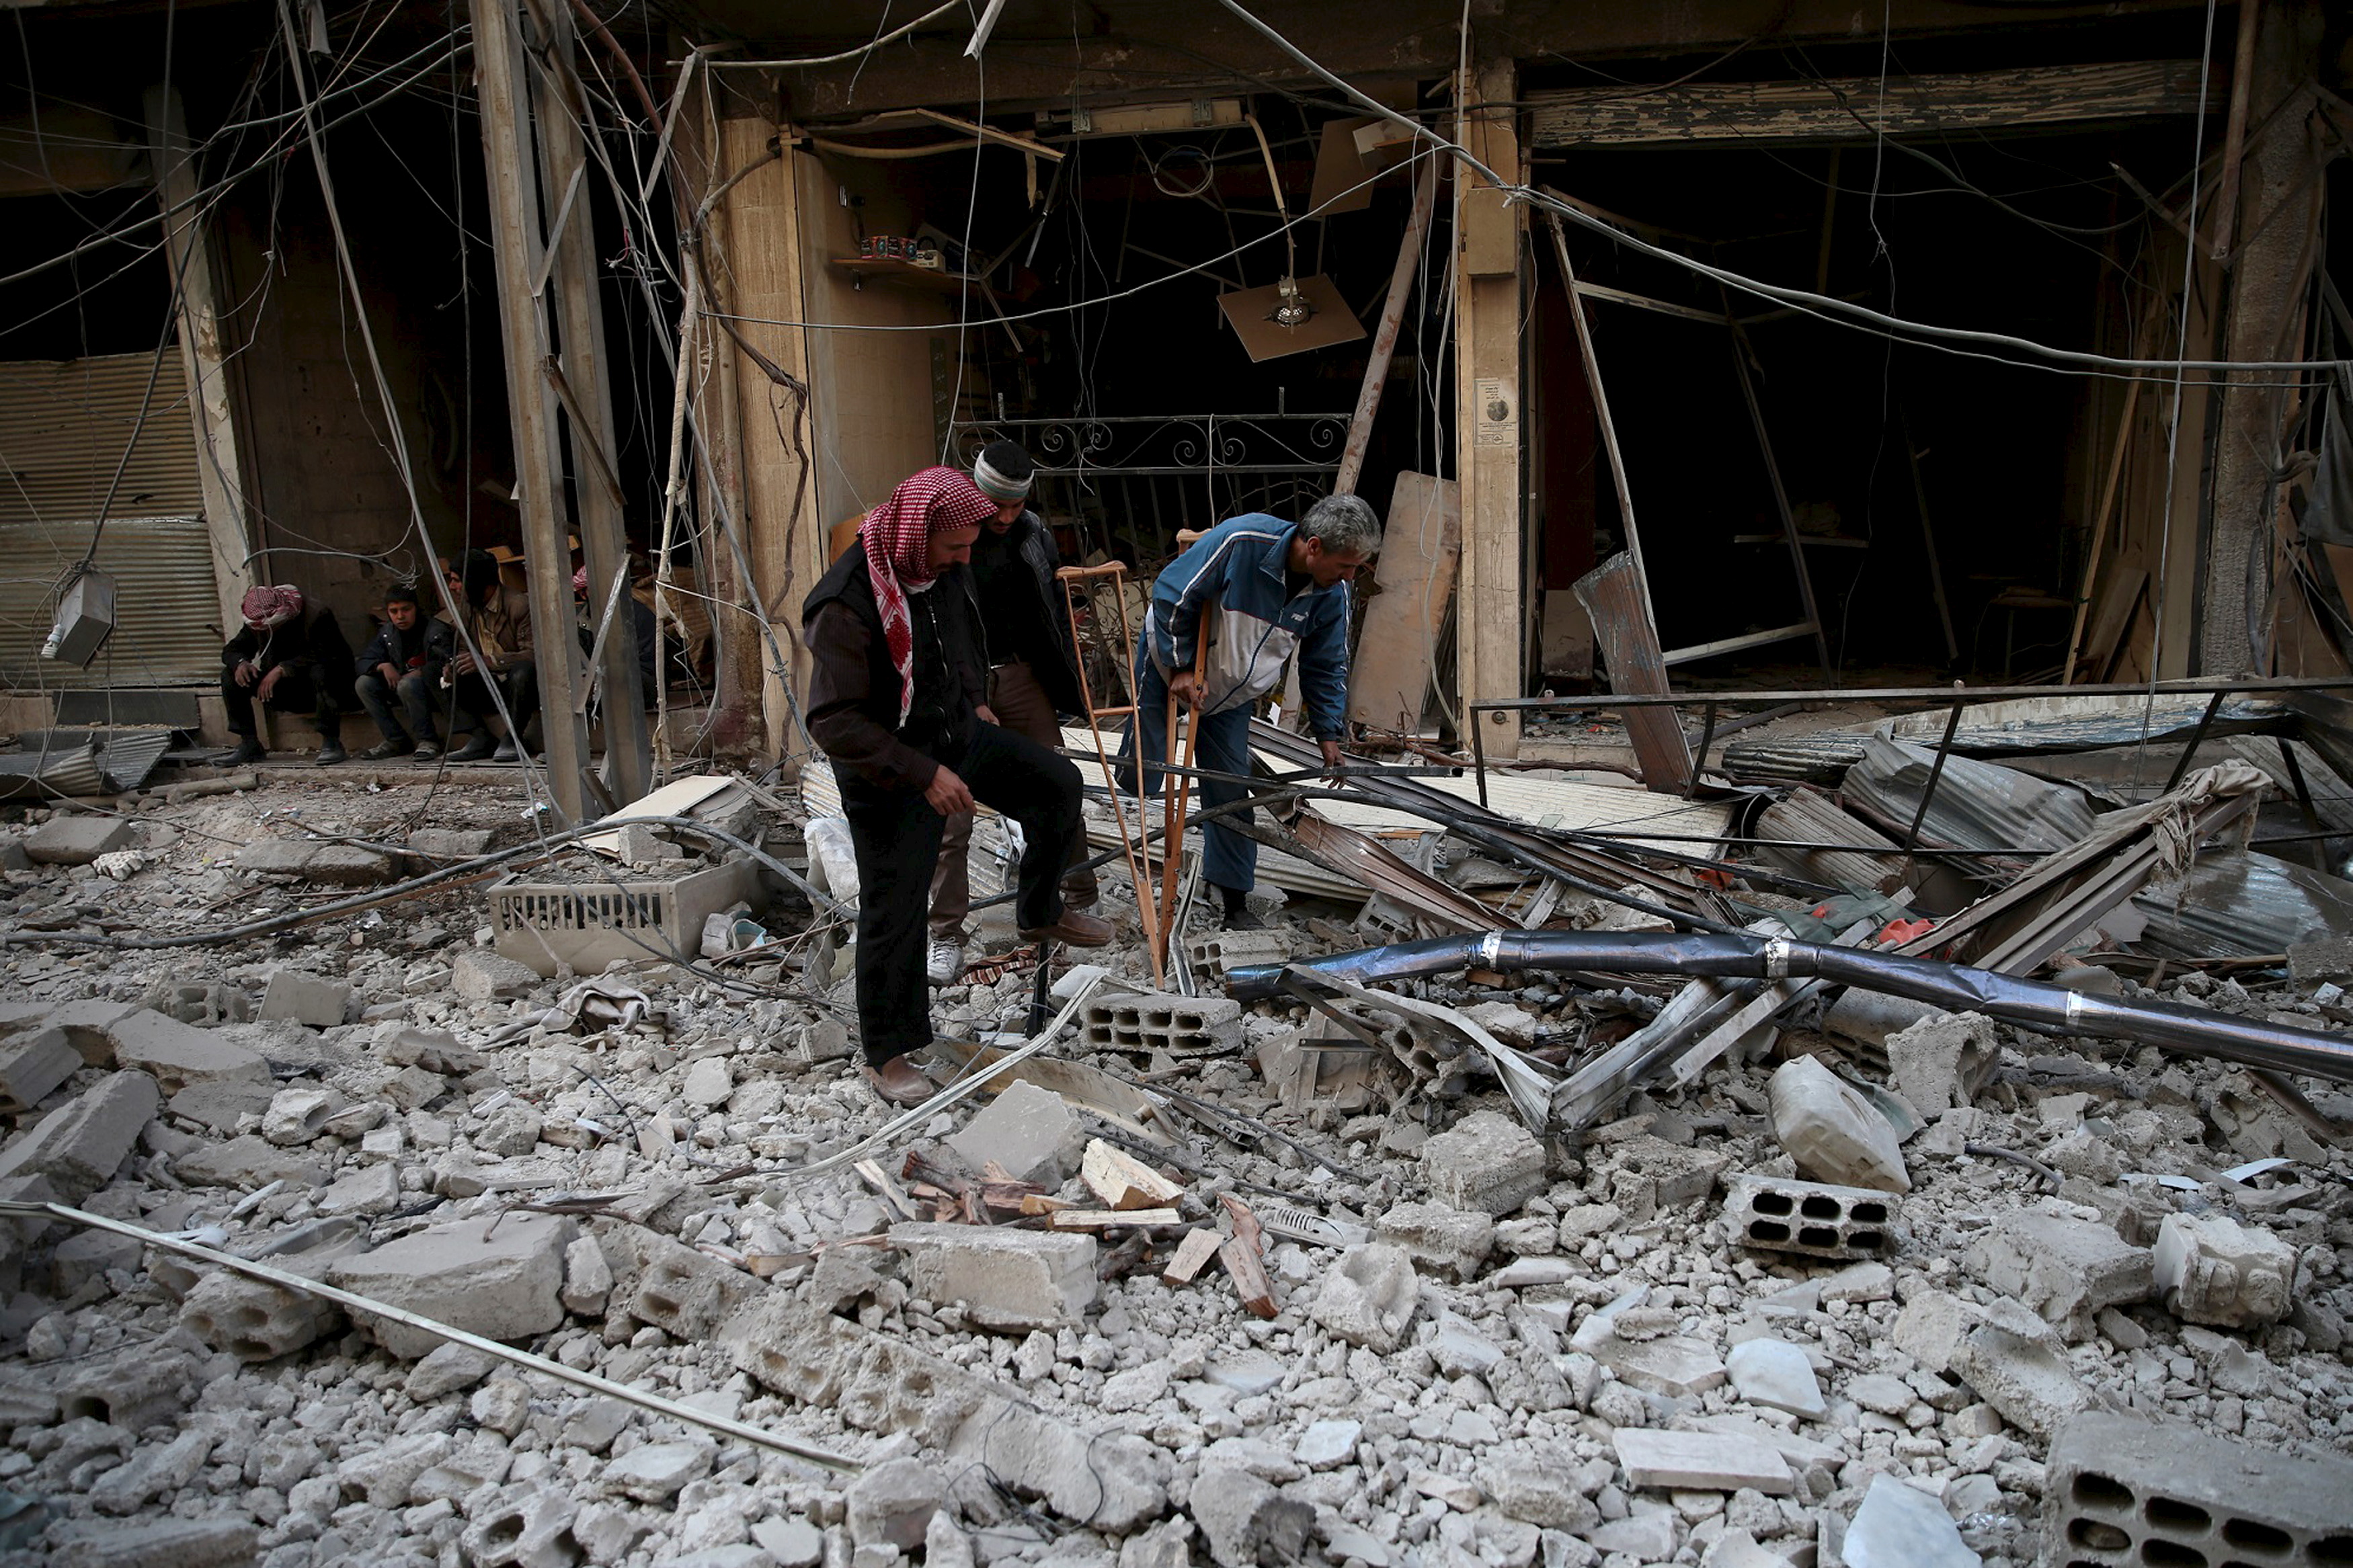 Men search for belongings at a site hit by missiles in the Douma neighborhood of Damascus on Dec. 13, 2015 (Bassam Khabieh—Reuters)